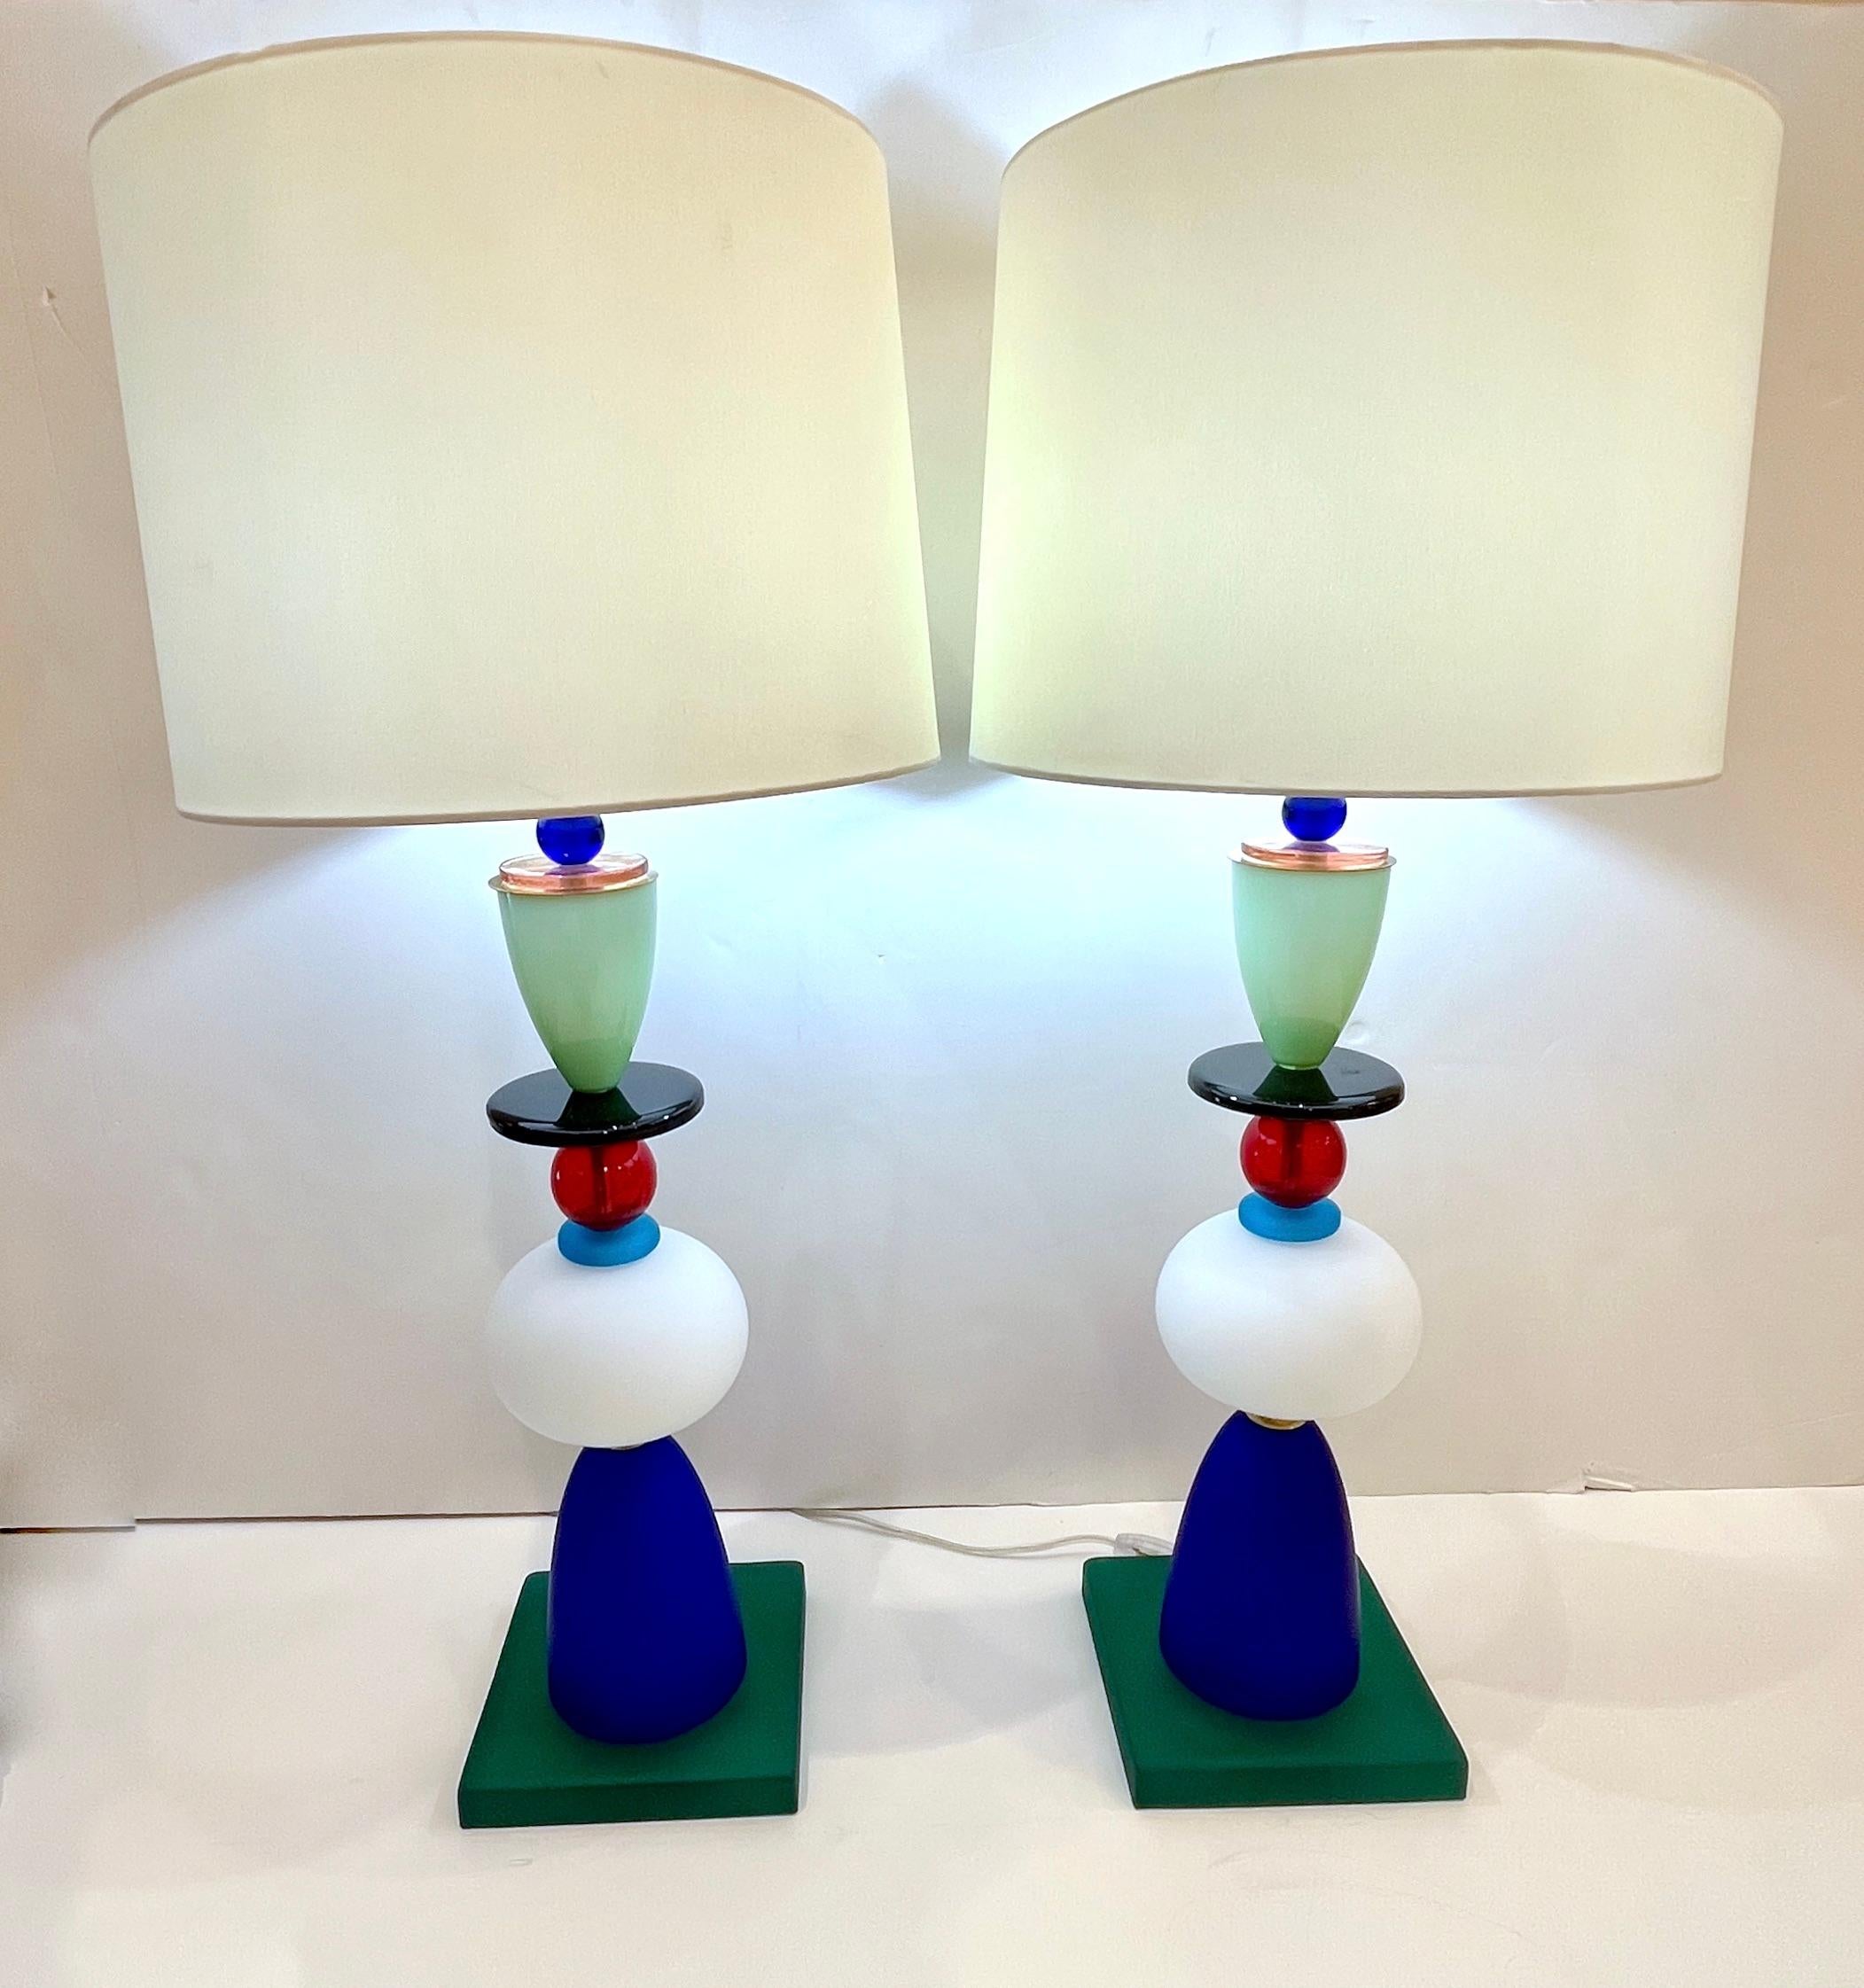 A 1980s unique pair of Italian colorful Murano glass lamps in the style of Ettore Sottsass for Memphis. Constructed with tiers of highly vibrant and geometrical colored blown Murano glass, each layer strategically placed for color and organic